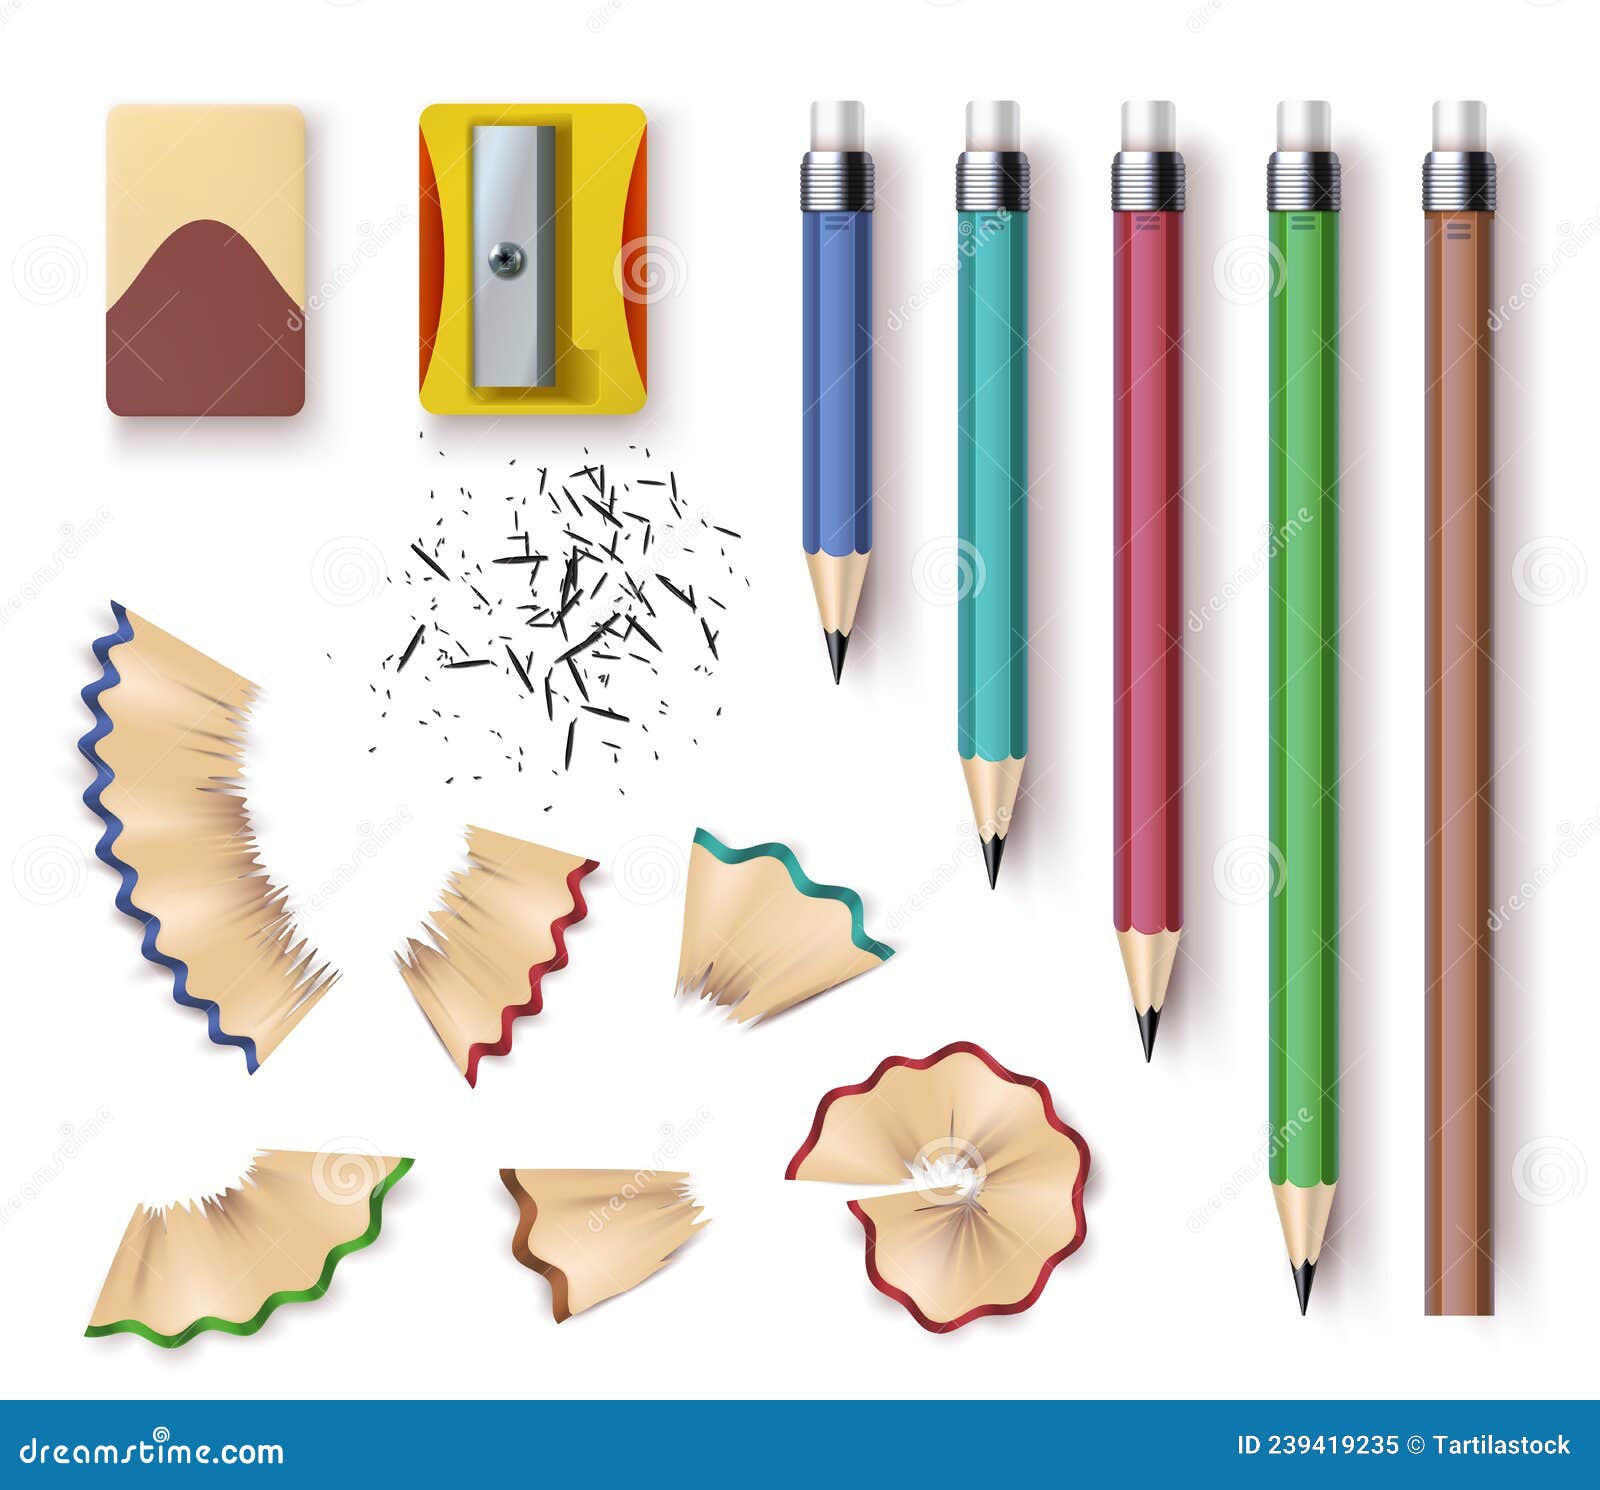 Collection of hand drawn stationery or writing utensils. Set of office and  art supplies isolated on white background - brush, pen, pencil, marker,  eraser, paint, sharpener. Vector illustration. Stock Vector